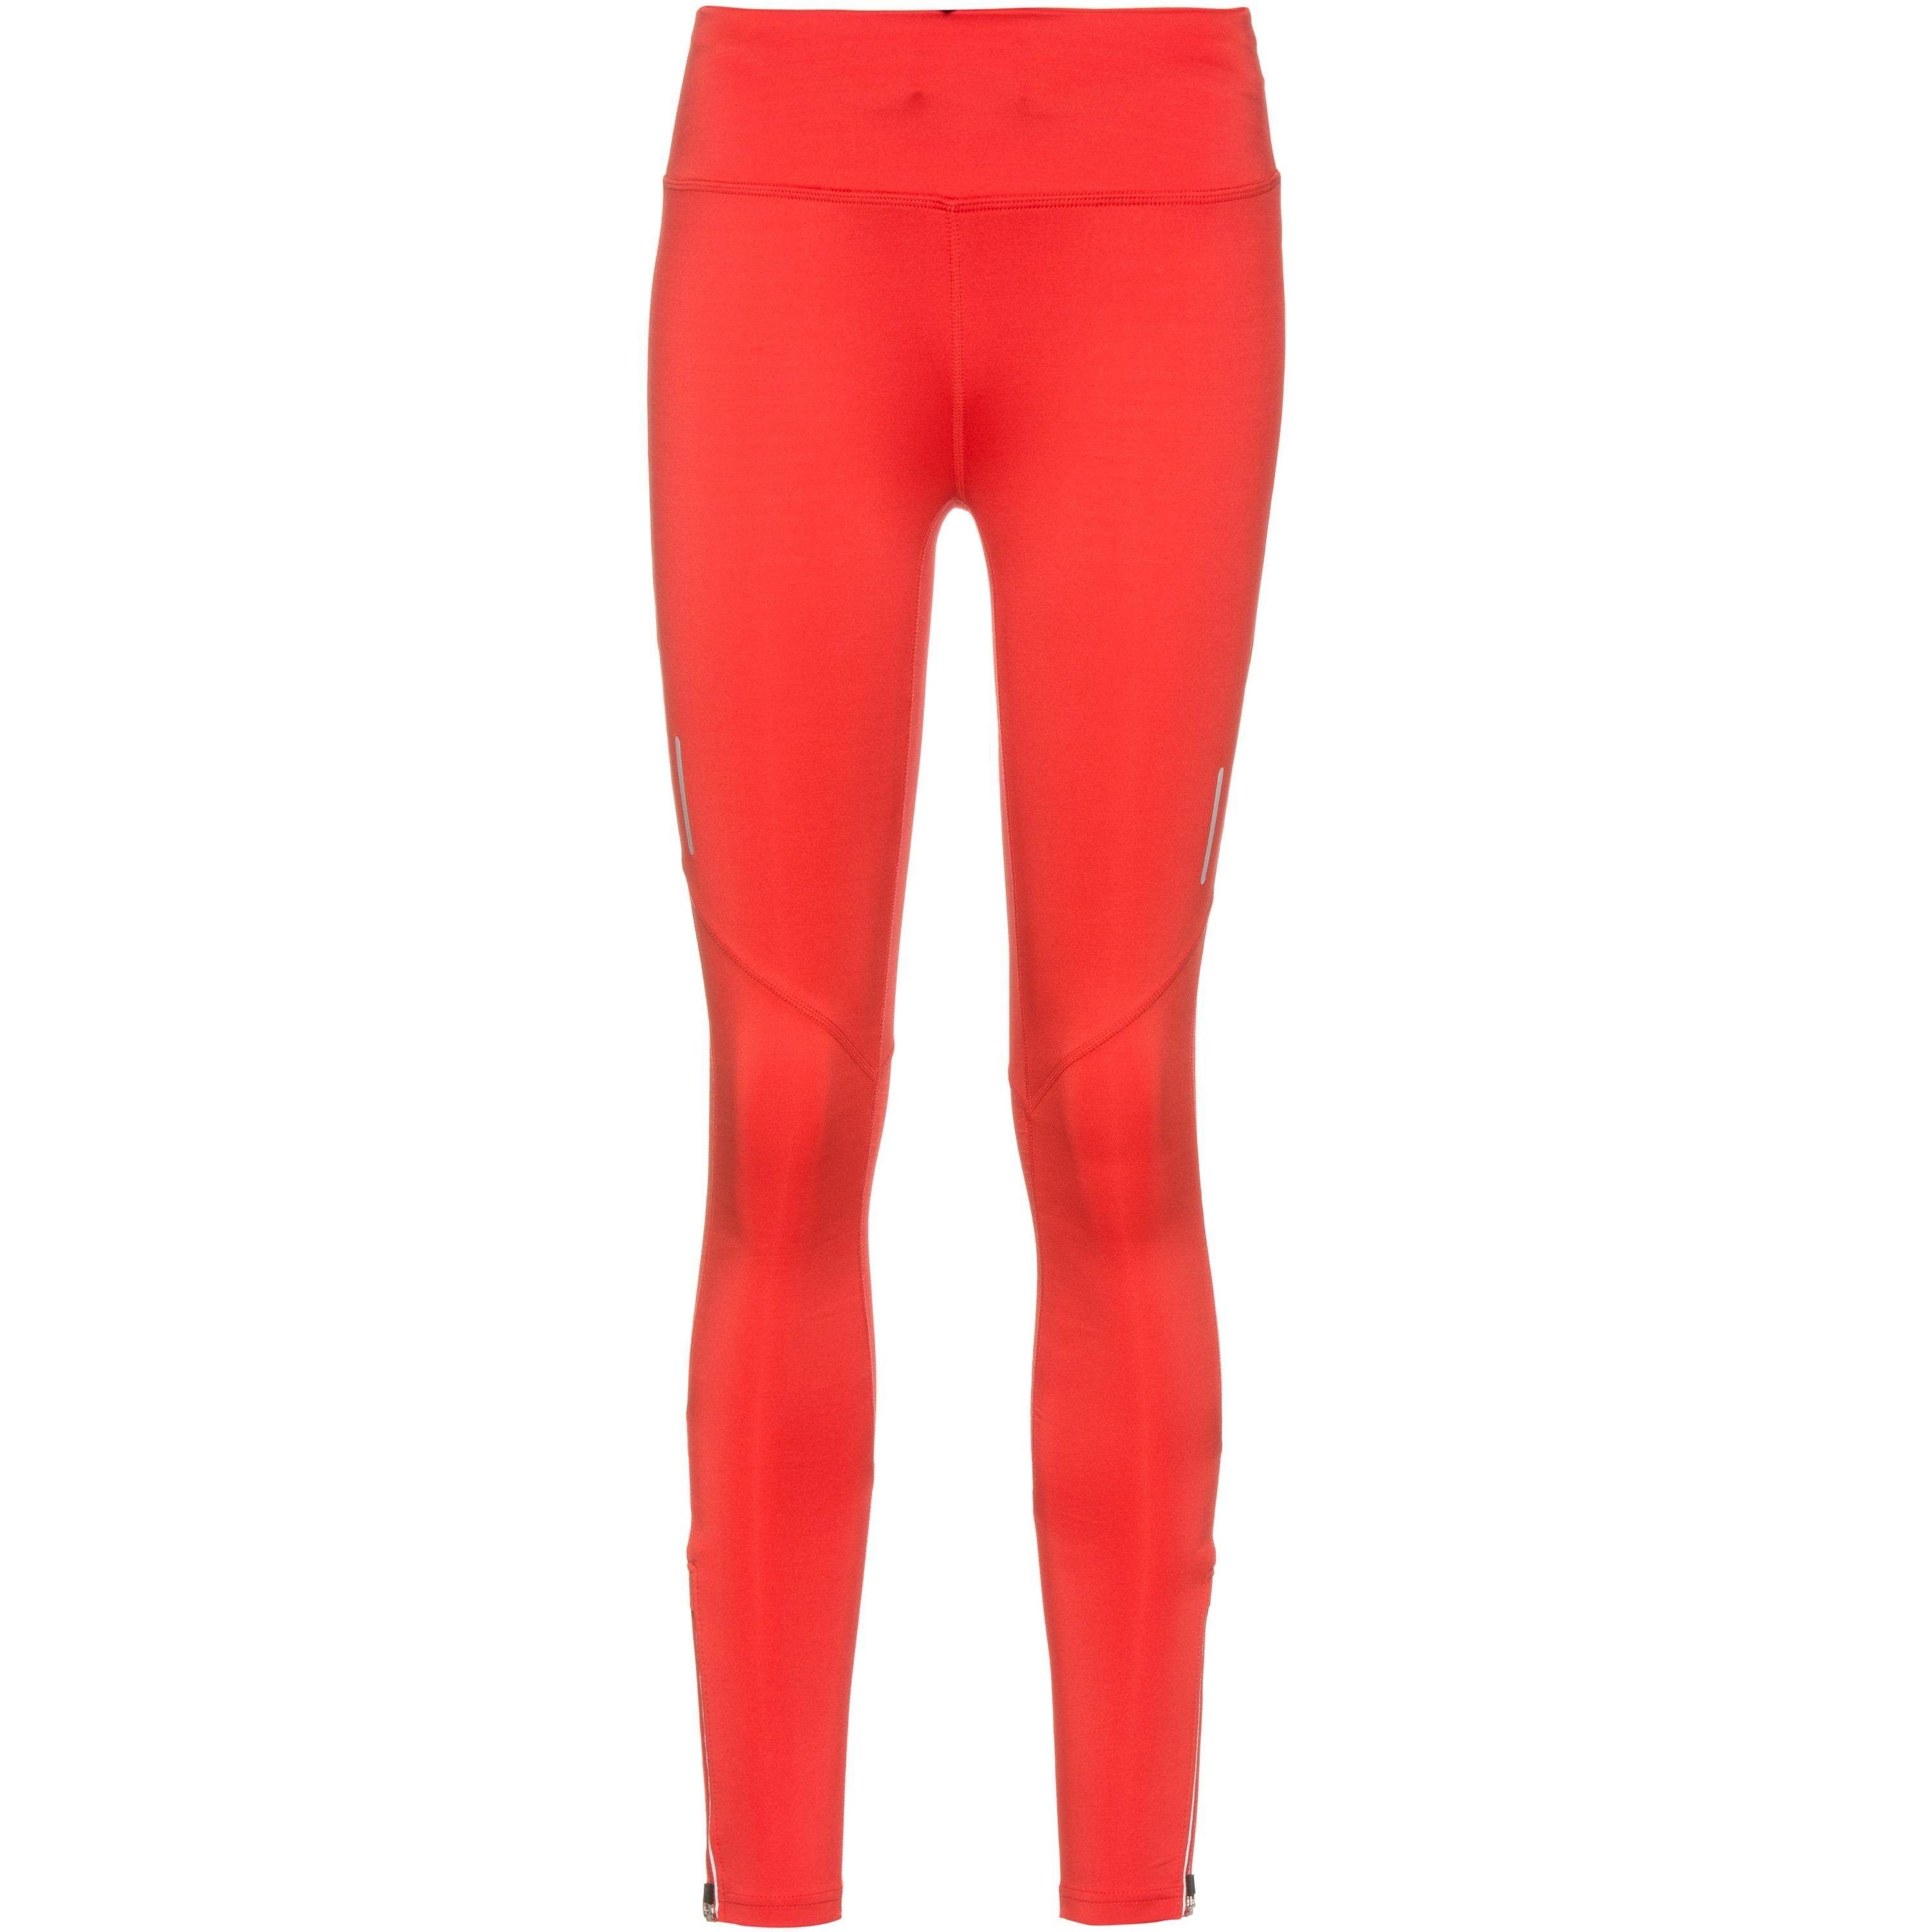 unifit Laufhose poppy red